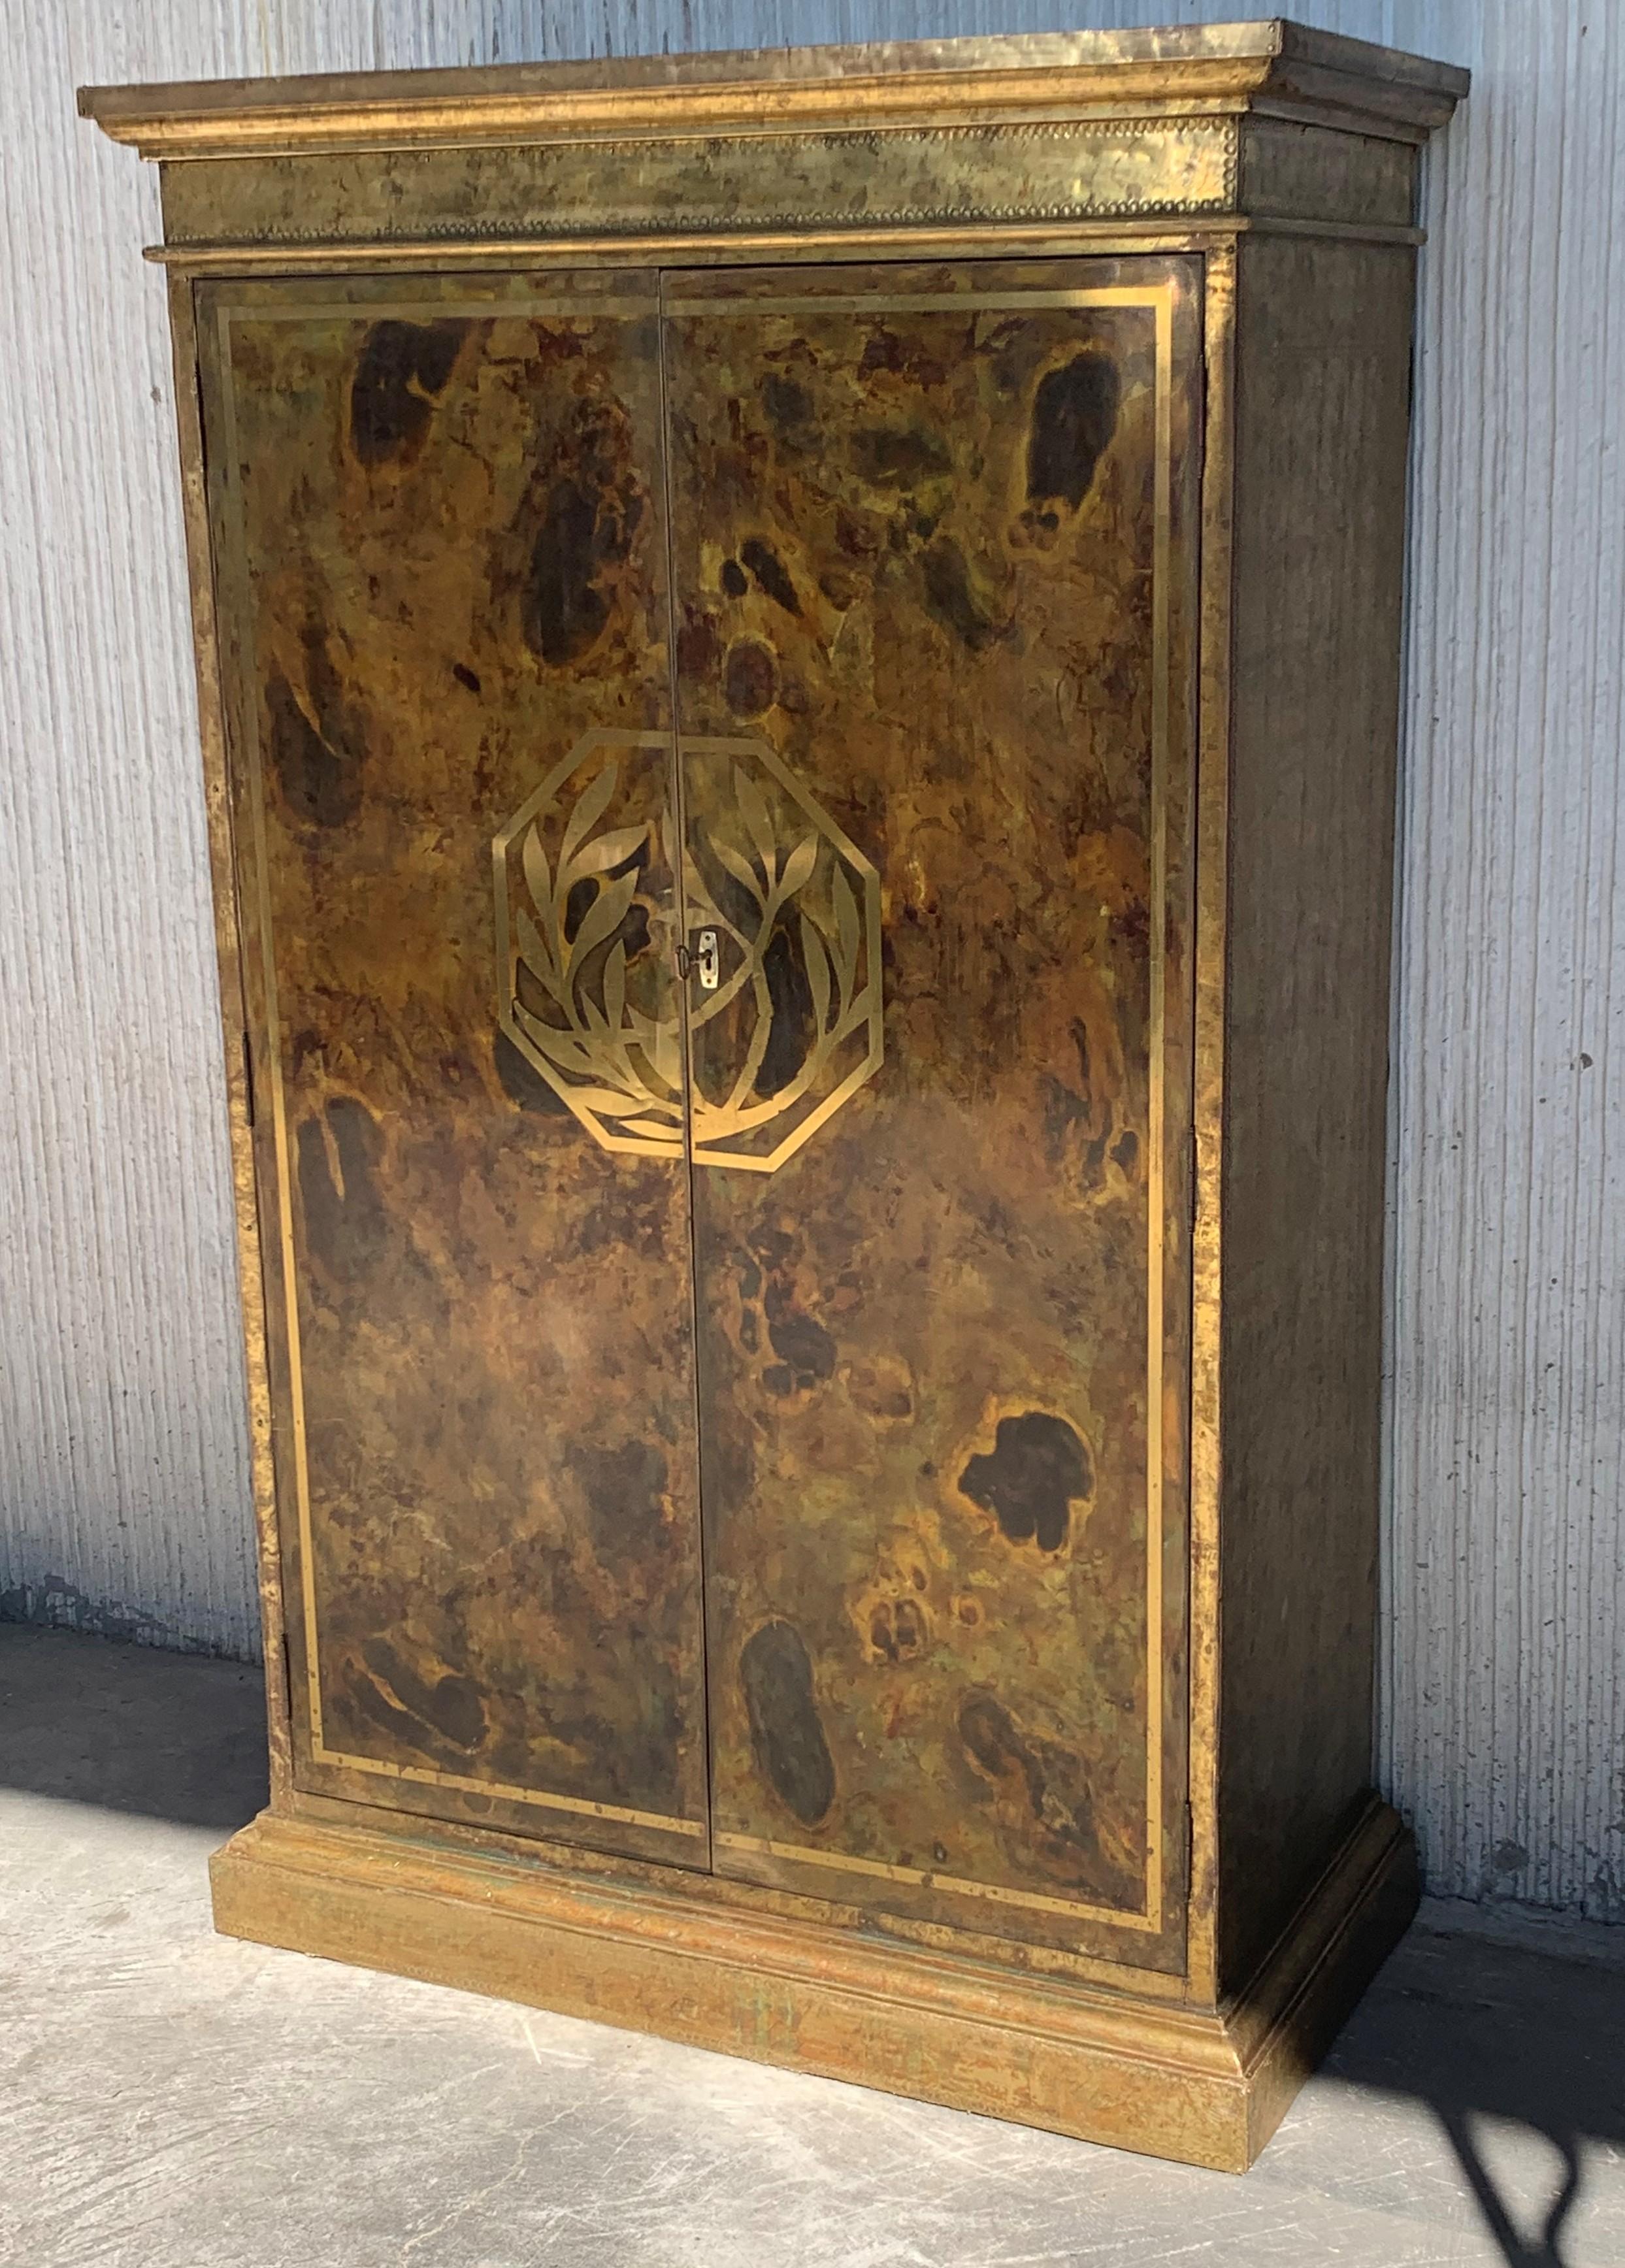 Mid-Century Modern drinks bar cabinet with nice brass faces with hammered brass nails, panels in a solid wood frame.
This piece its from the 1960s, beautiful oxidation that opens up completely.

The interior has a superior glass shelve, one